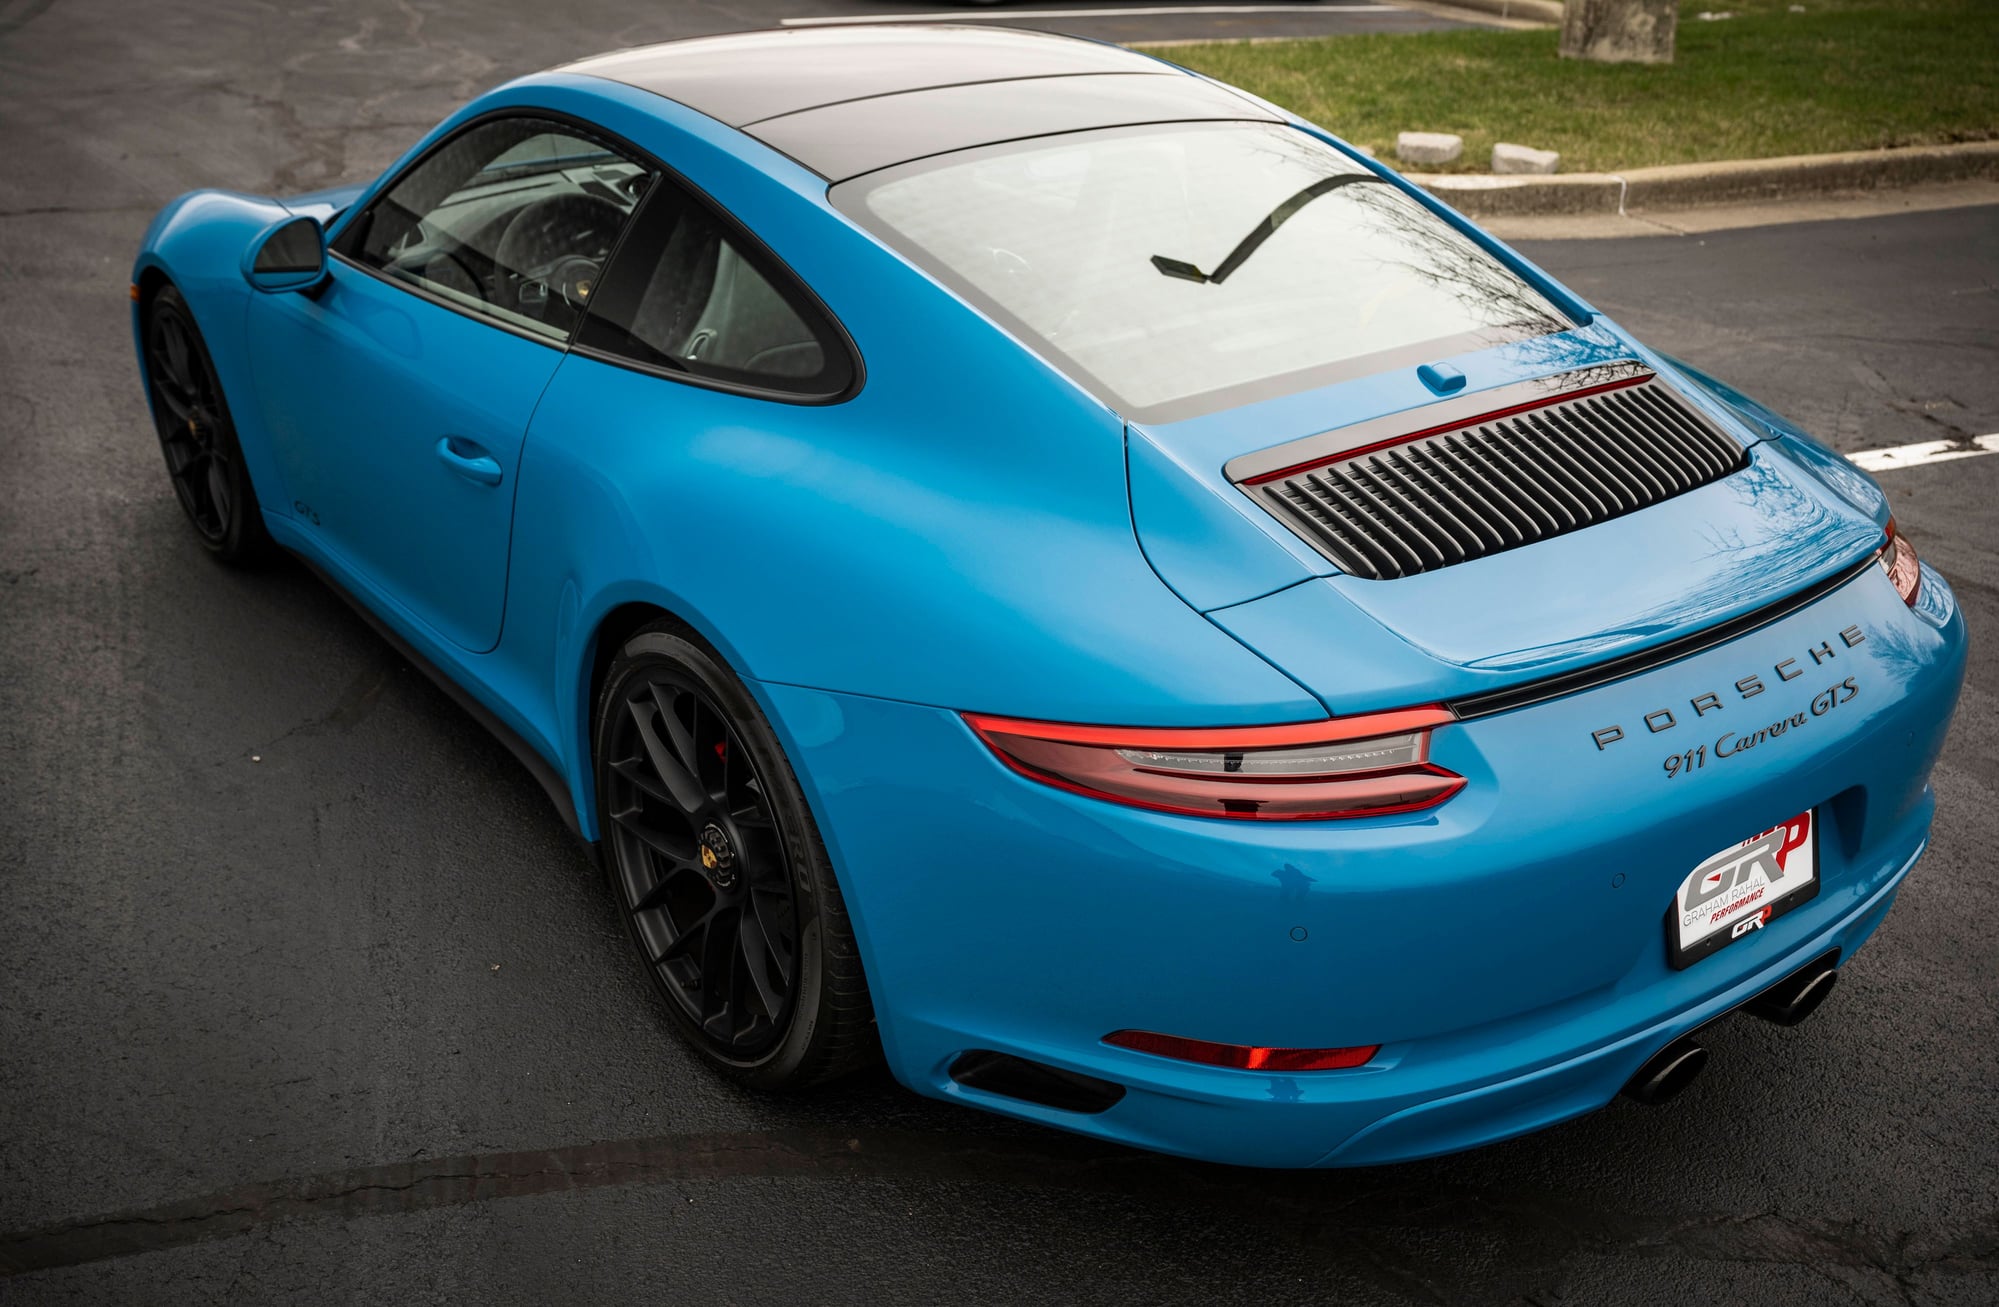 2019 Porsche 911 - 2019 Porsche 911 Carrera GTS - PTS Blue Turquoise - Used - VIN WP0AB2A95KS115188 - 10,328 Miles - 6 cyl - 2WD - Automatic - Coupe - Blue - Brownsburg, IN 46112, United States